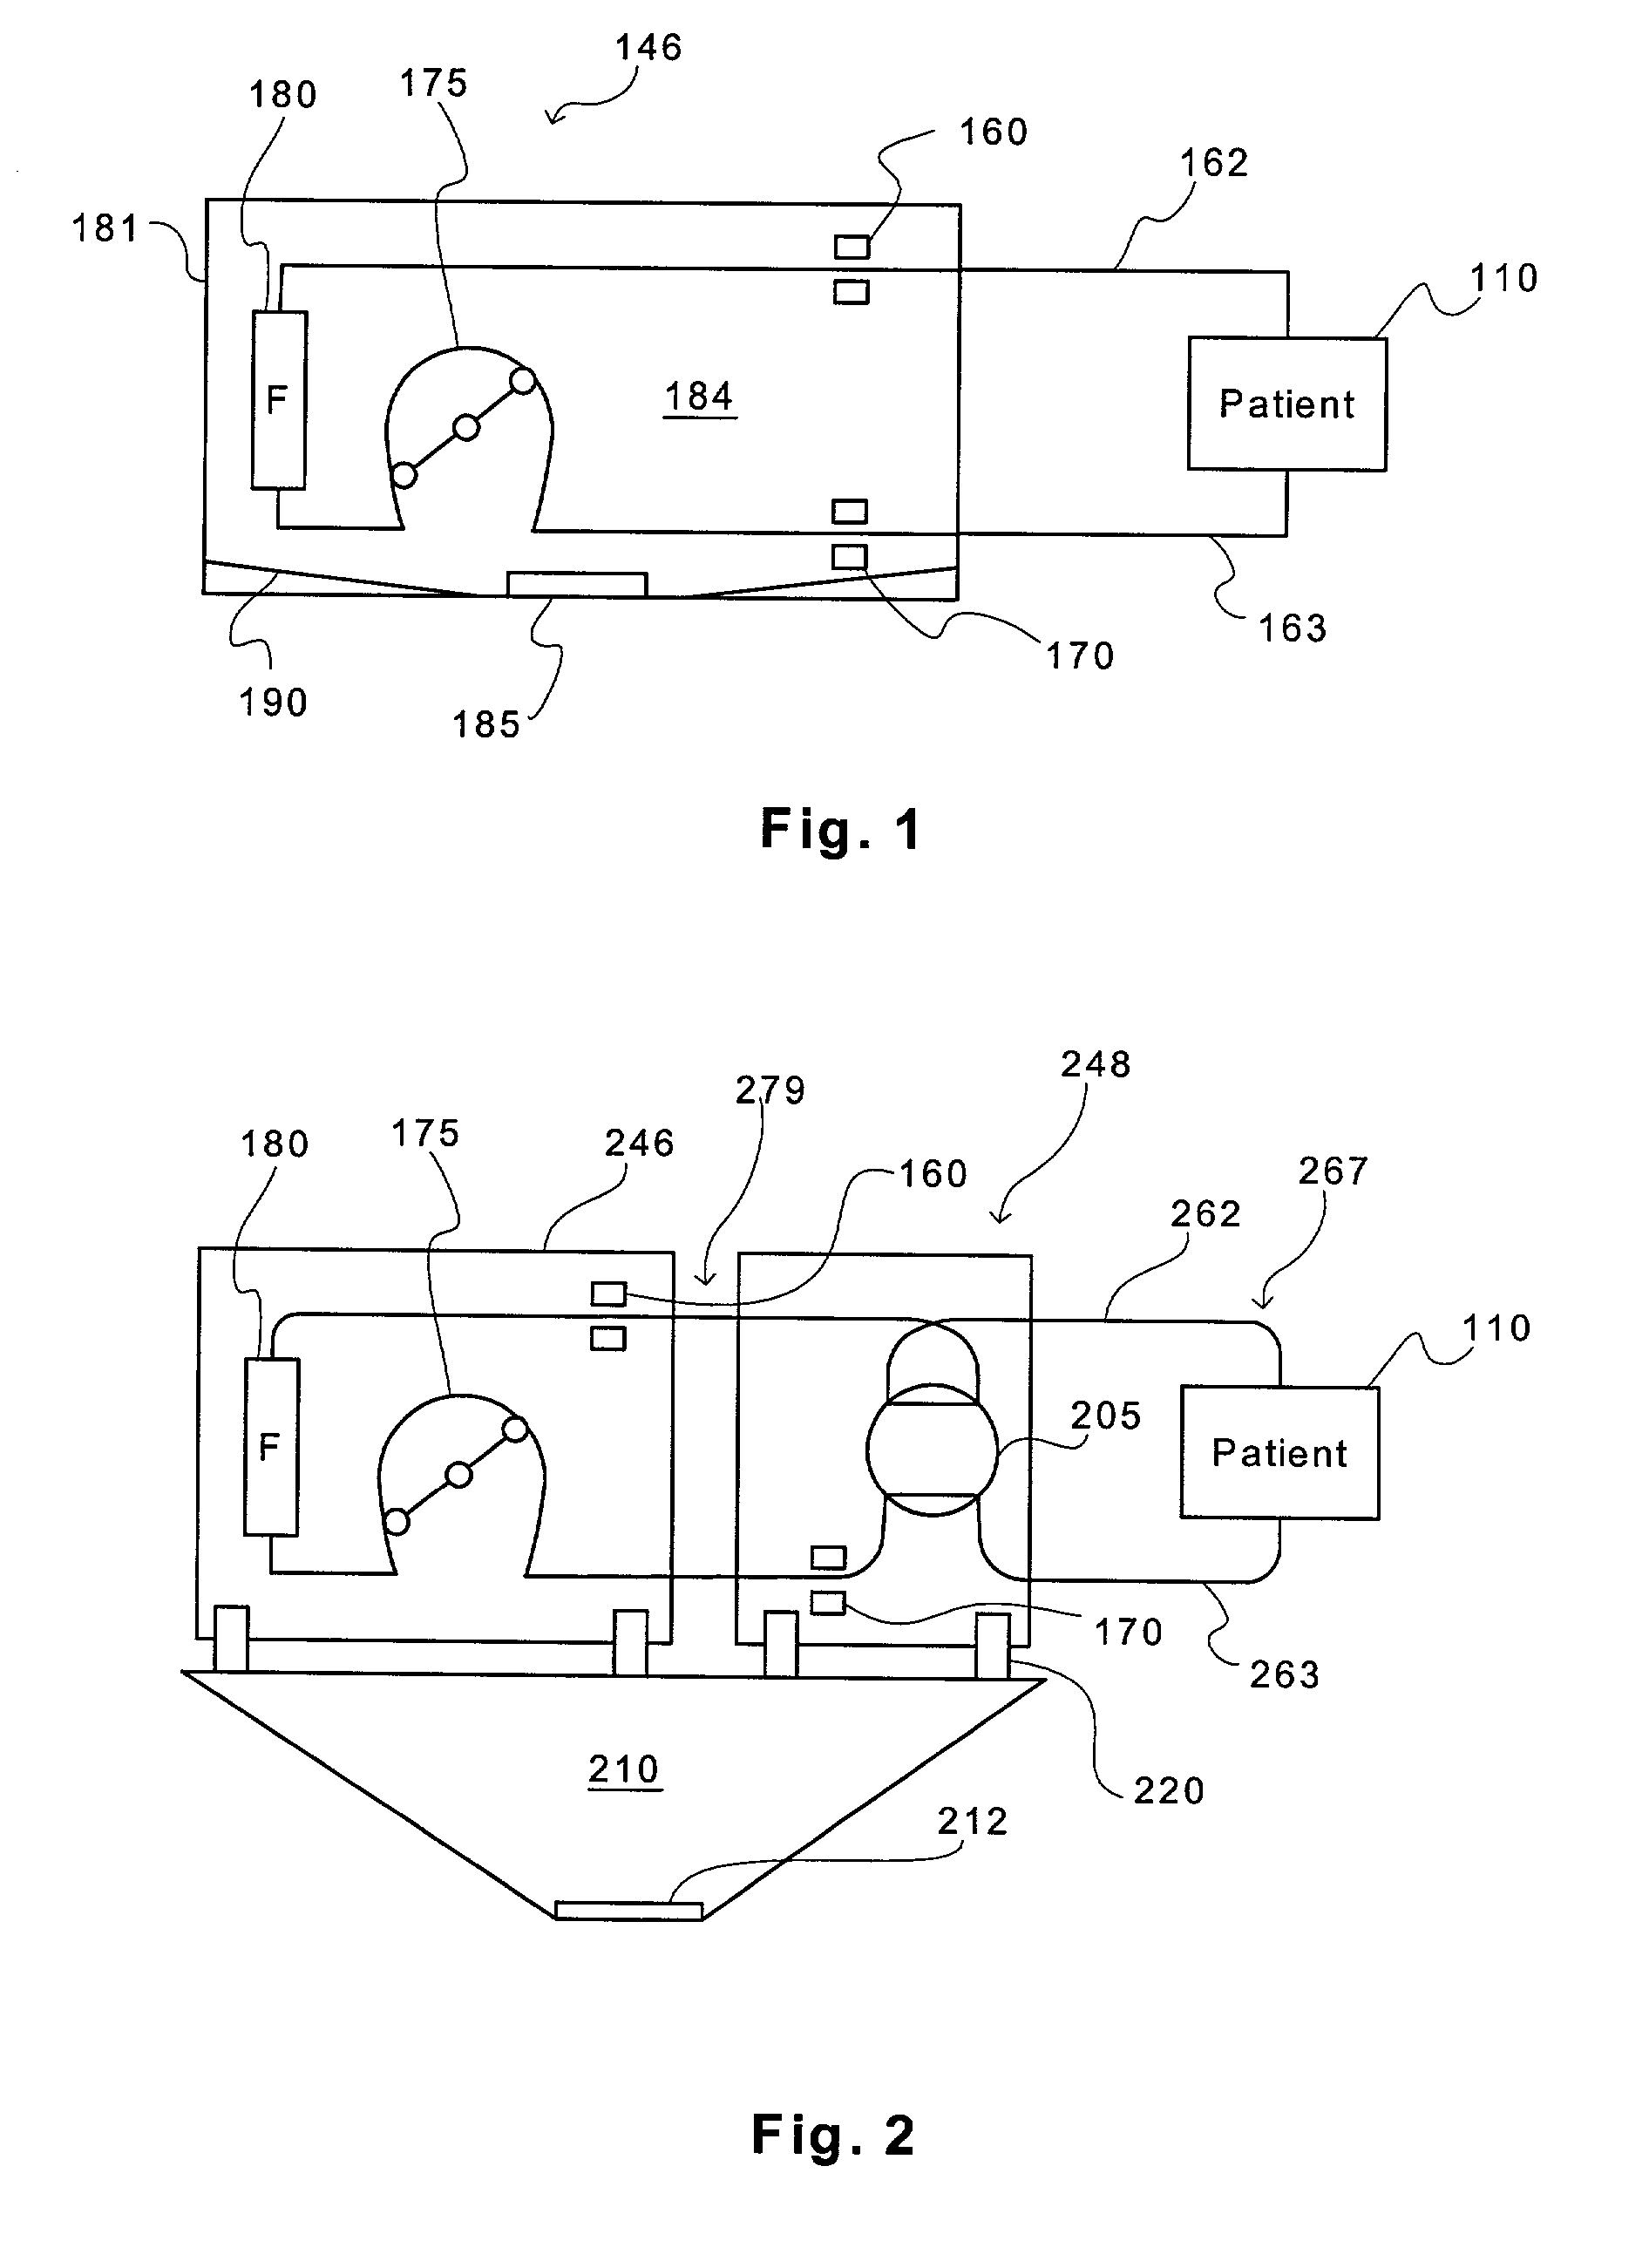 Method and apparatus for leak detection in blood circuits combining external fluid detection and air infiltration detection